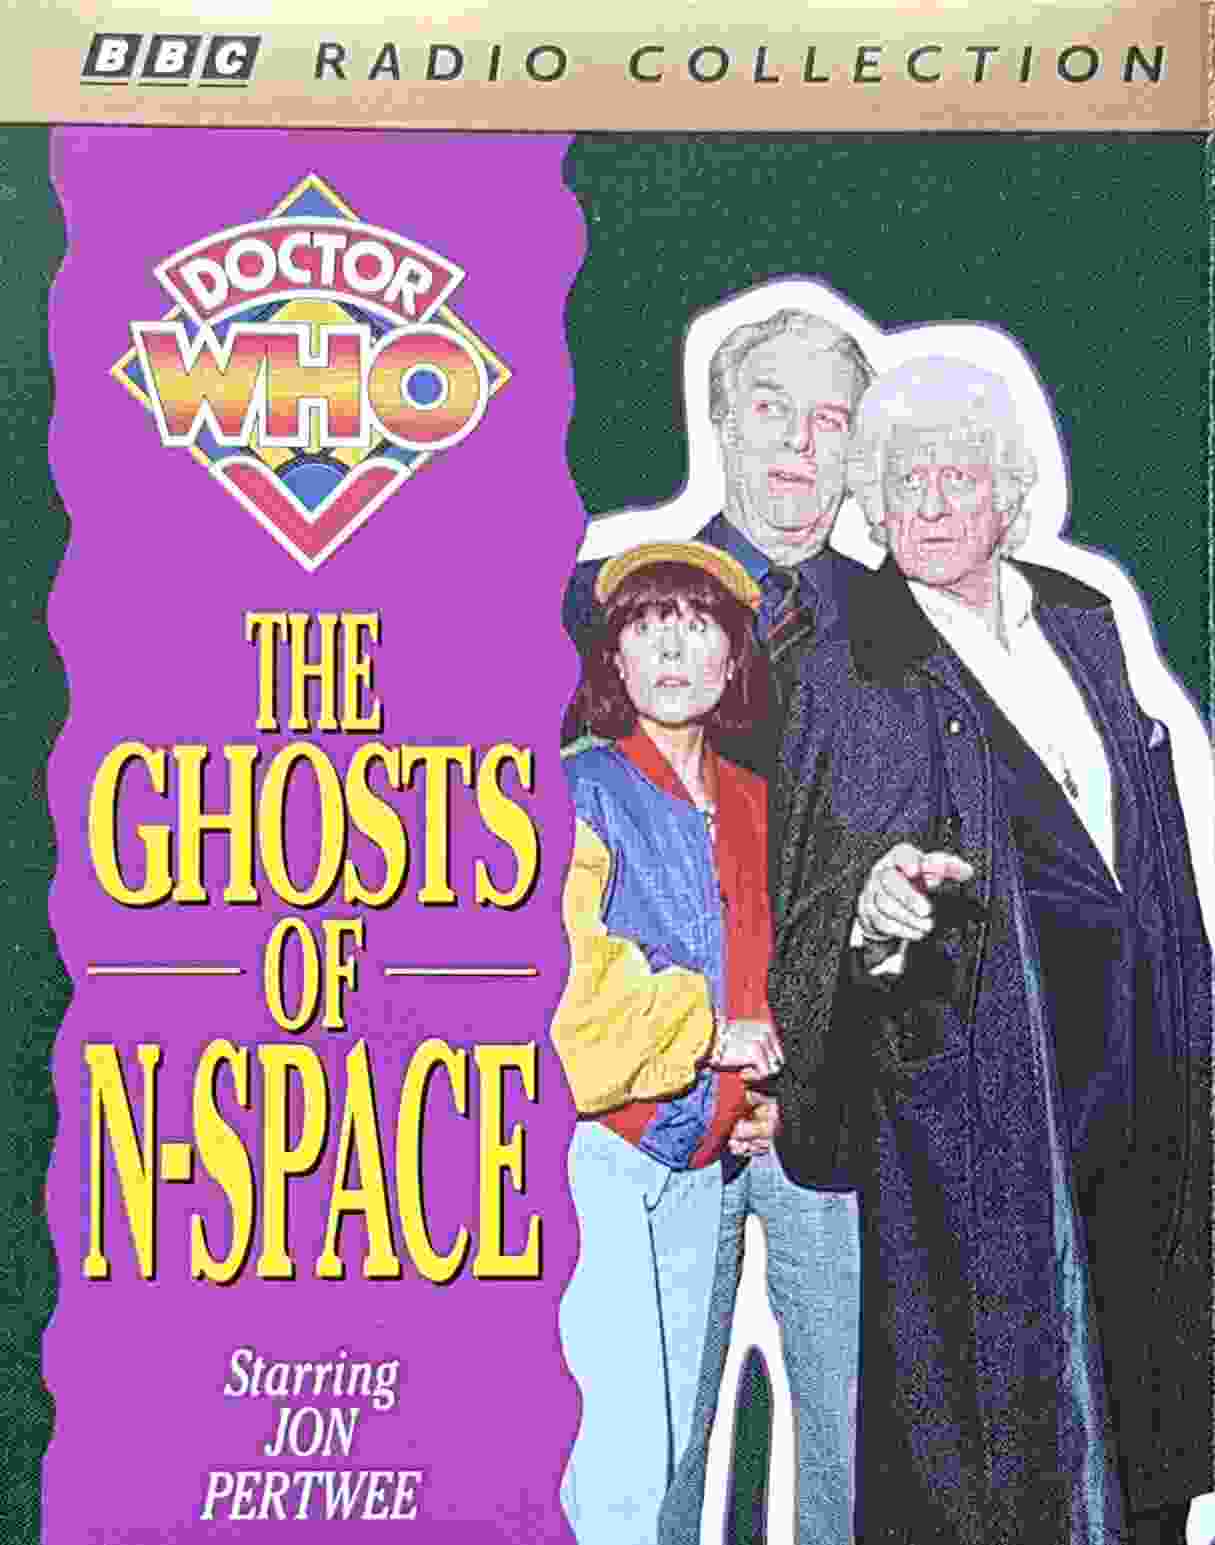 Picture of ZBBC 1813 Doctor Who - The ghosts of 'n' space by artist Unknown from the BBC cassettes - Records and Tapes library